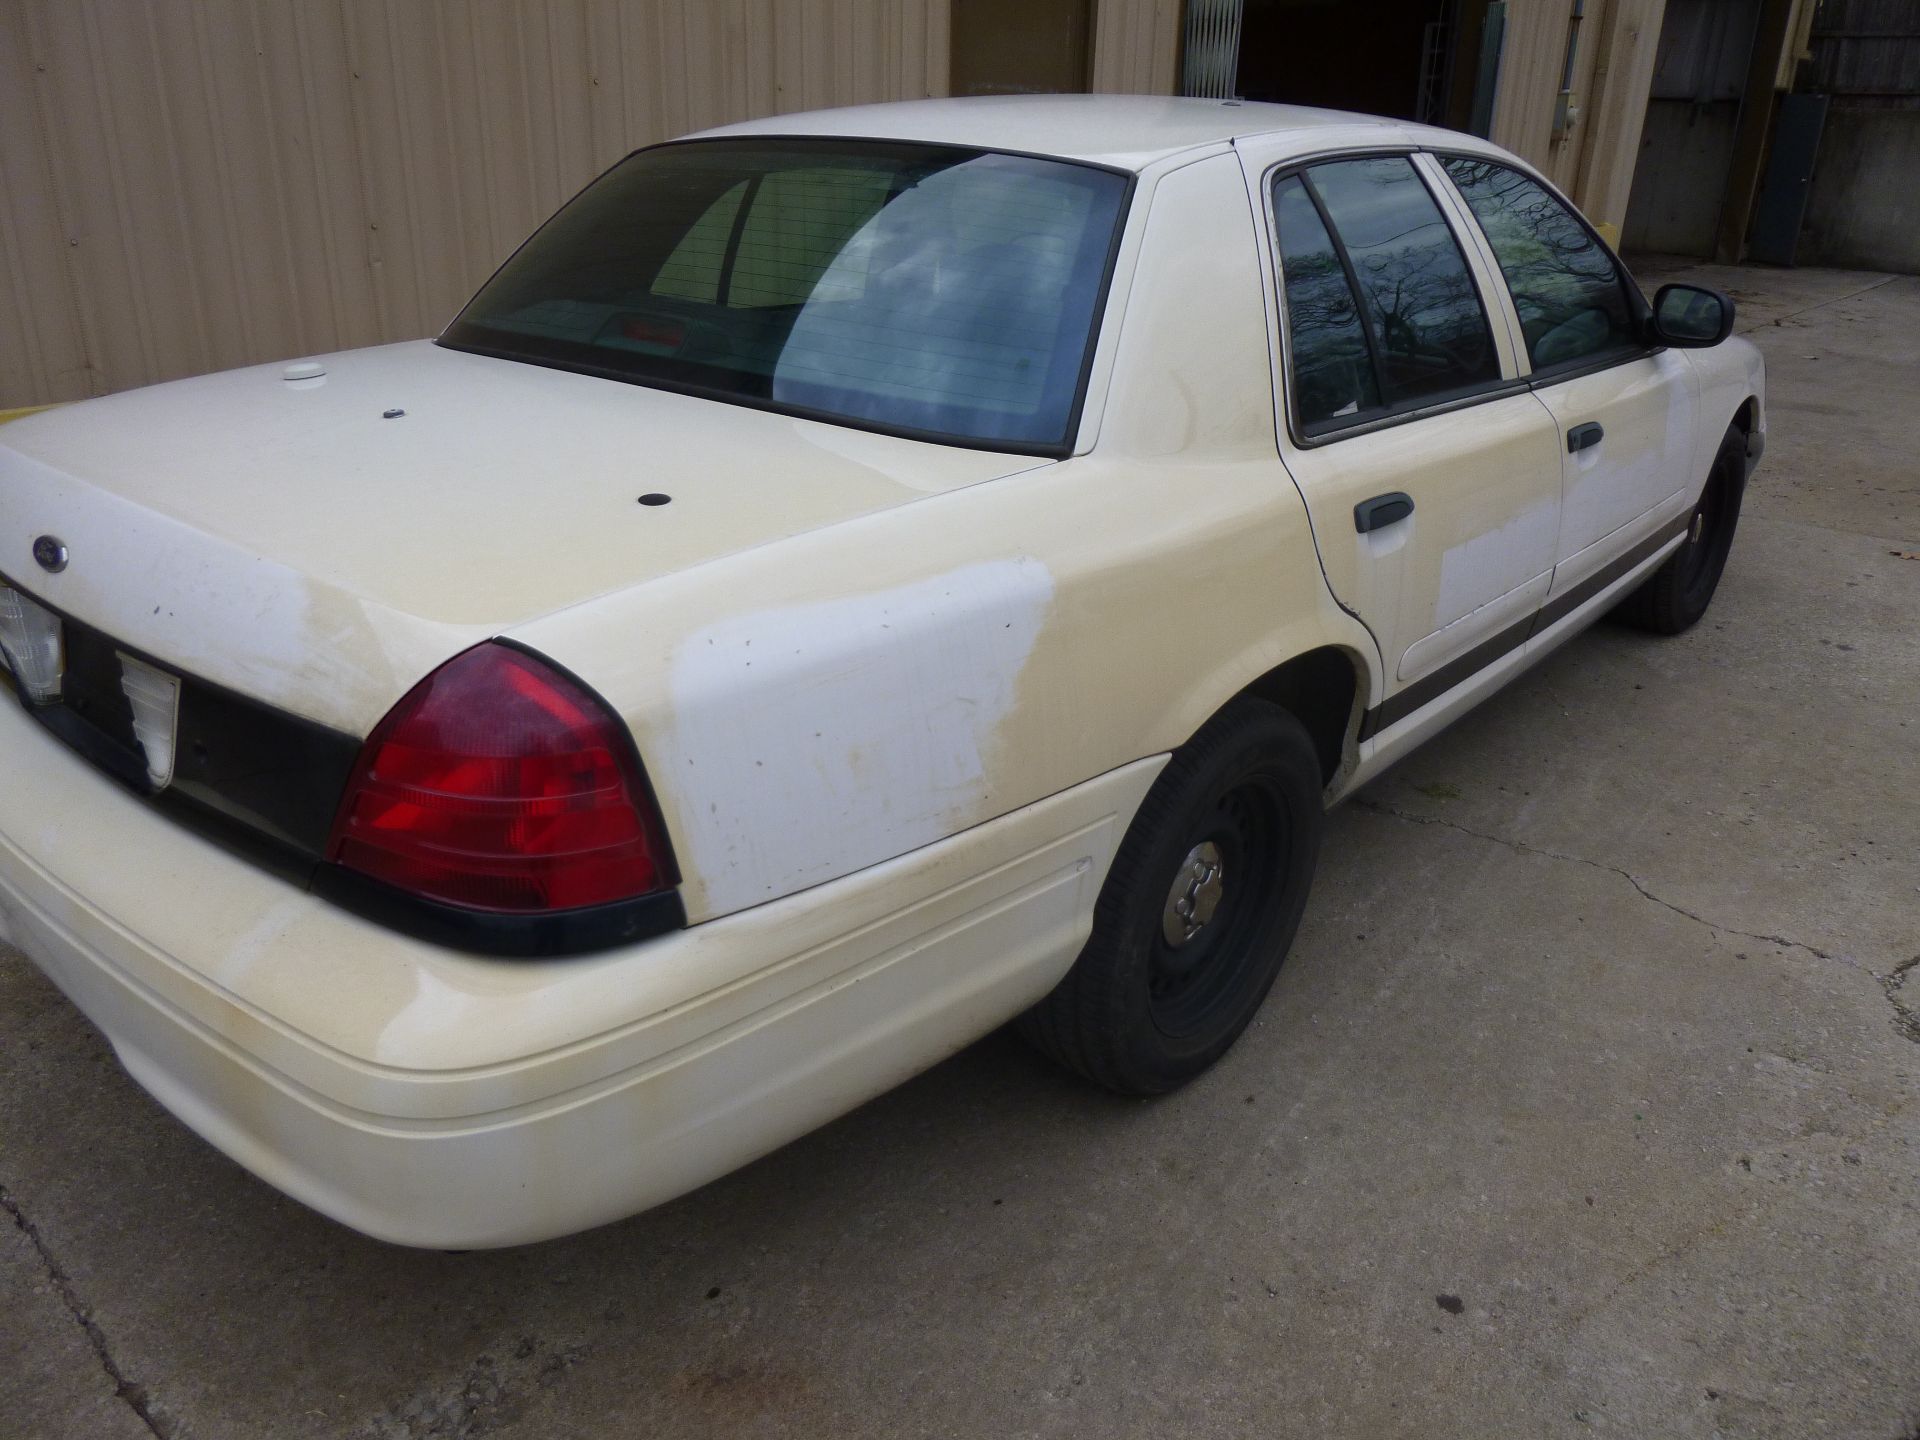 2002 Ford Crown Victoria Police Interceptor miles 112174 Vin # 2FAFP71W32X136232 CLEAR TITLE( - Image 7 of 10